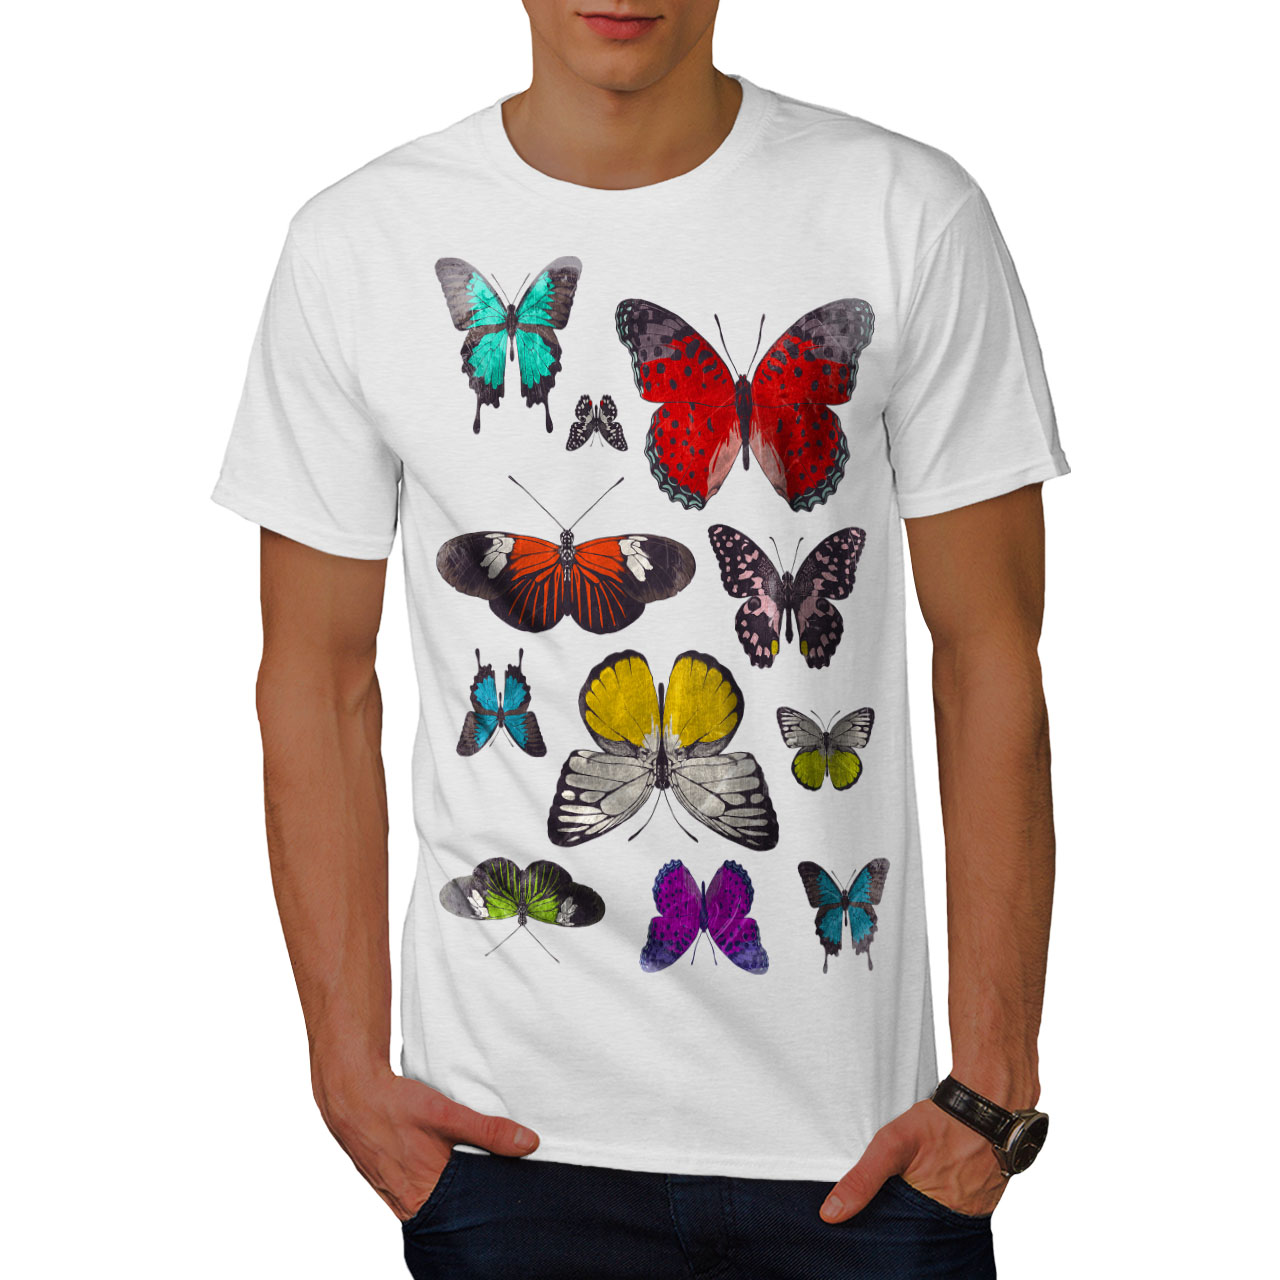 Wellcoda Butterfly Collection Mens T-shirt, Color Graphic Design ...